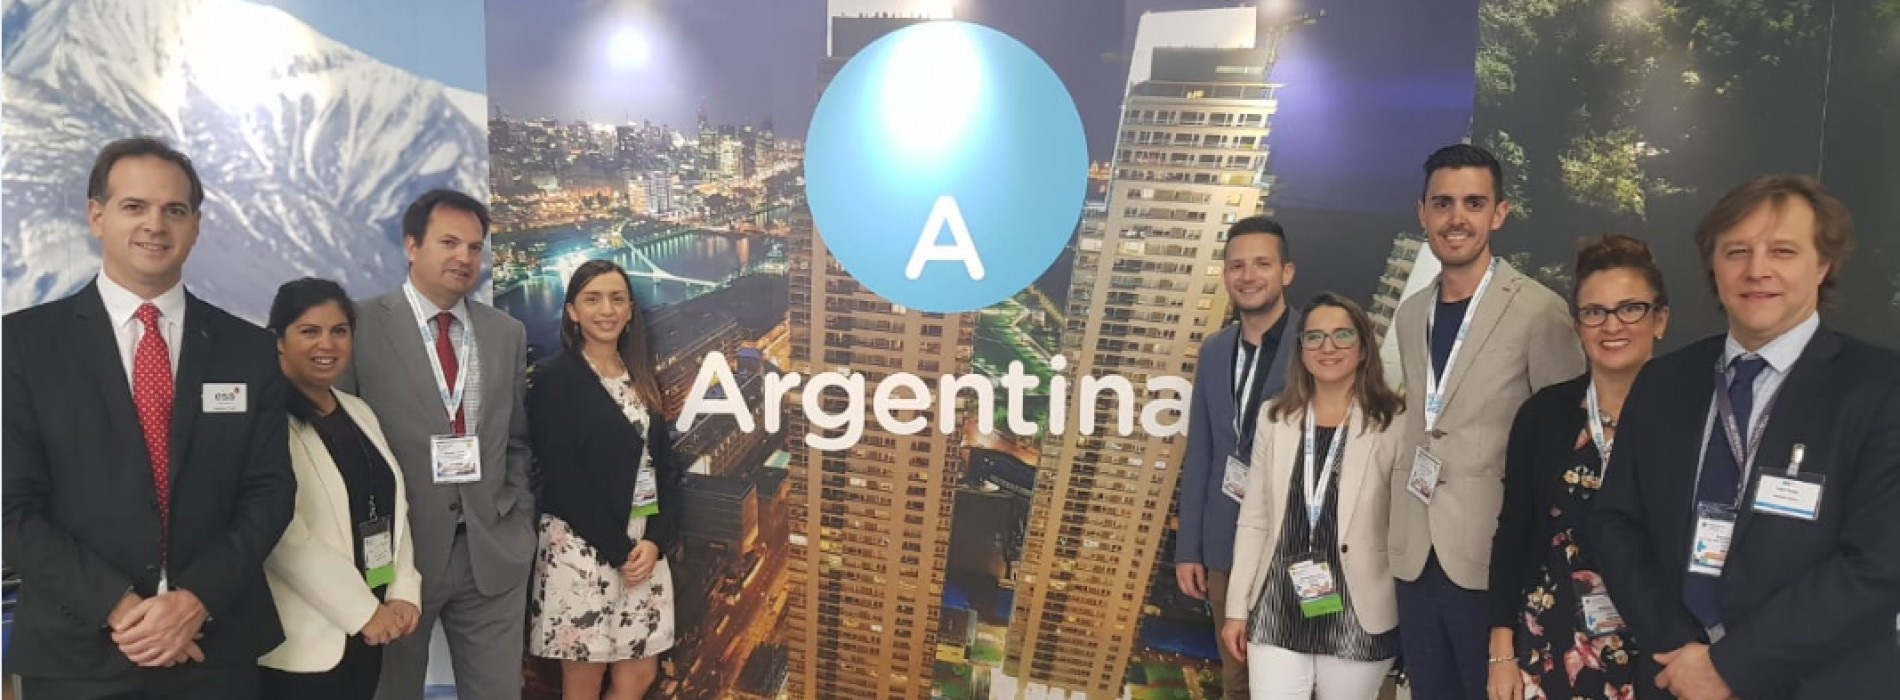 Argentina holds a presence at The Meetings Show